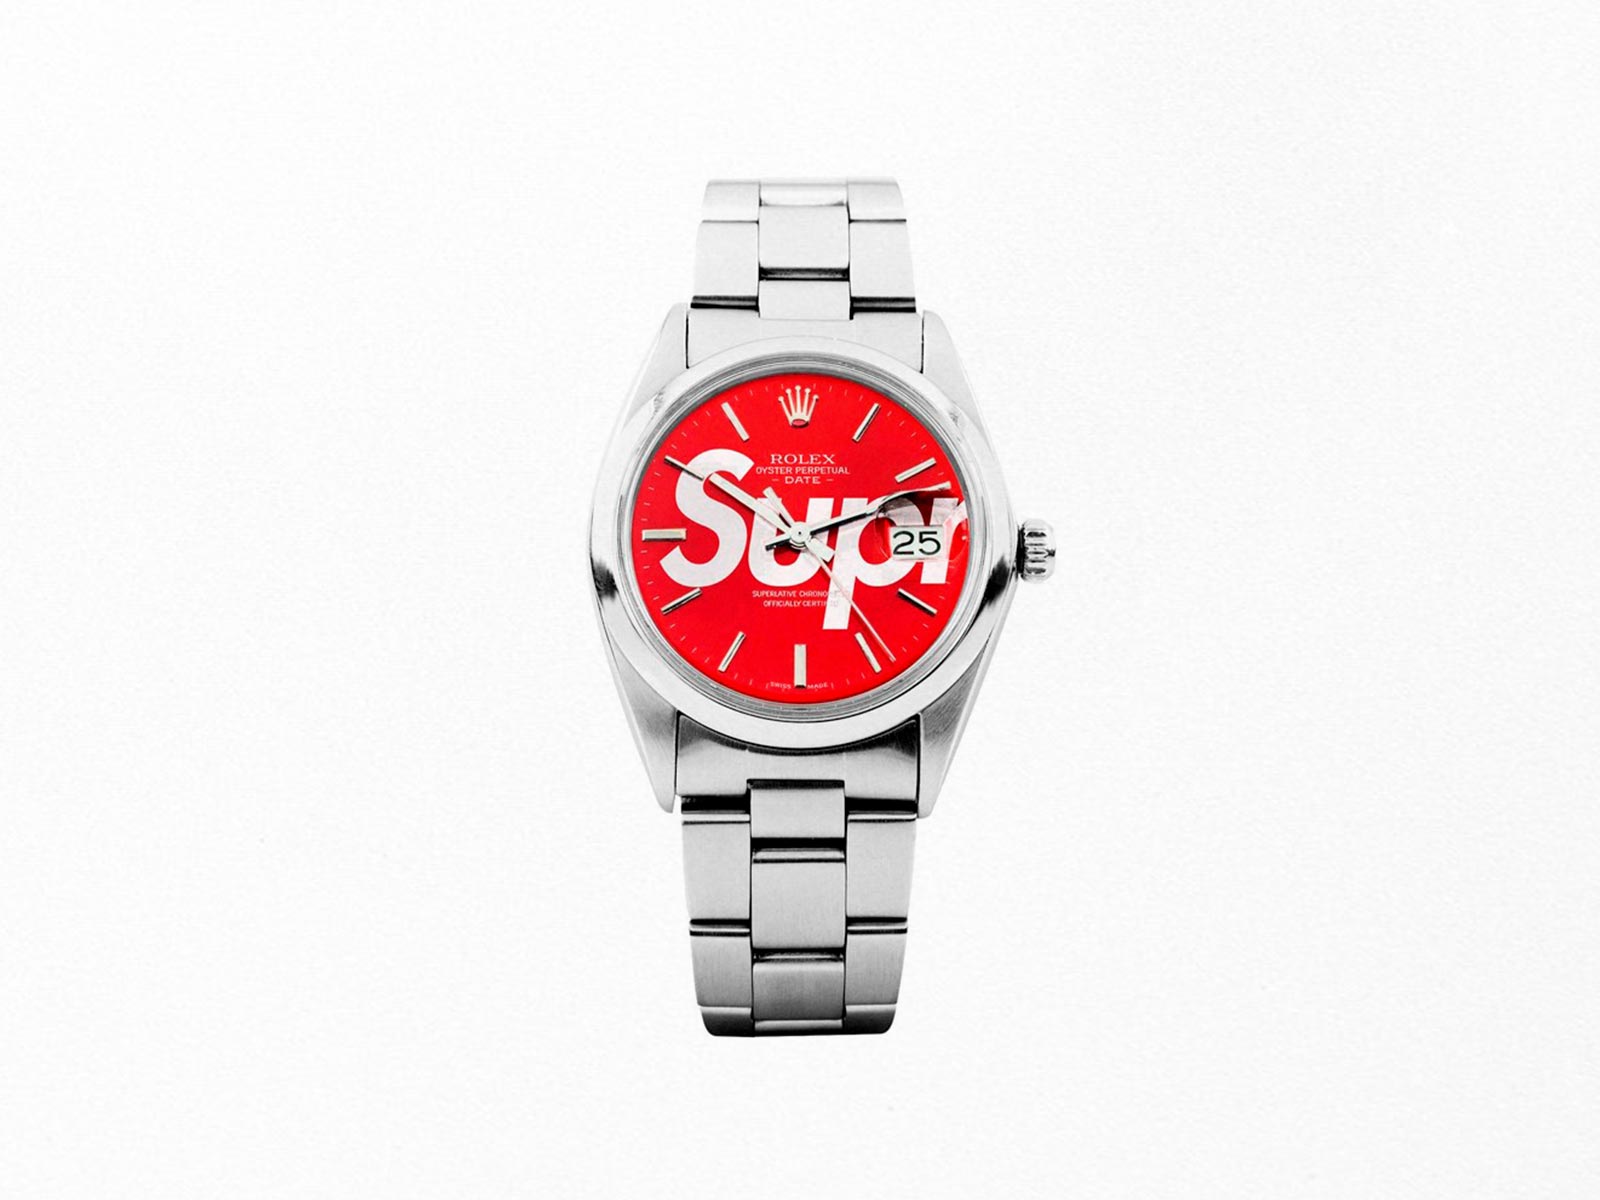 A second collaboration between Supreme and Rolex could be possible